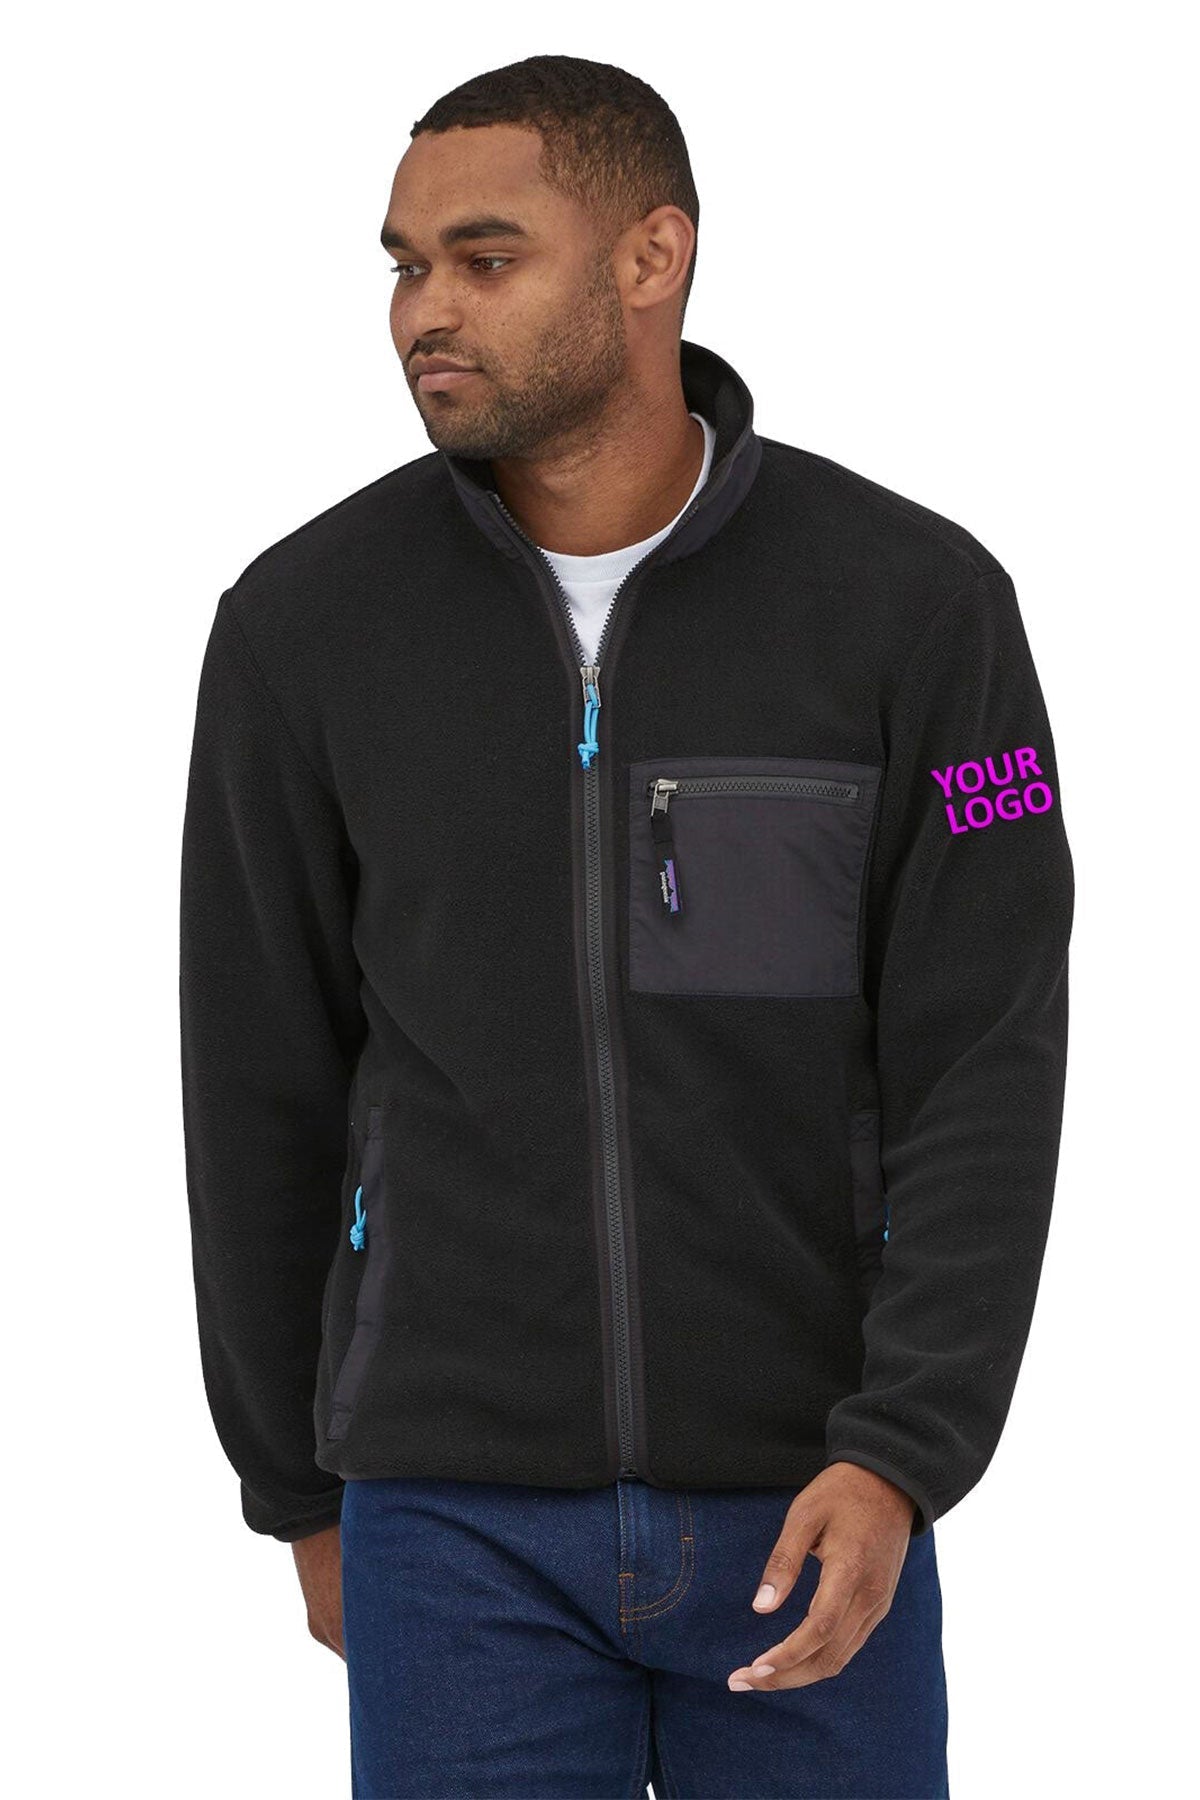 Custom The North Face® Sweater Fleece Ladies Jacket, Personalized  Outerwear